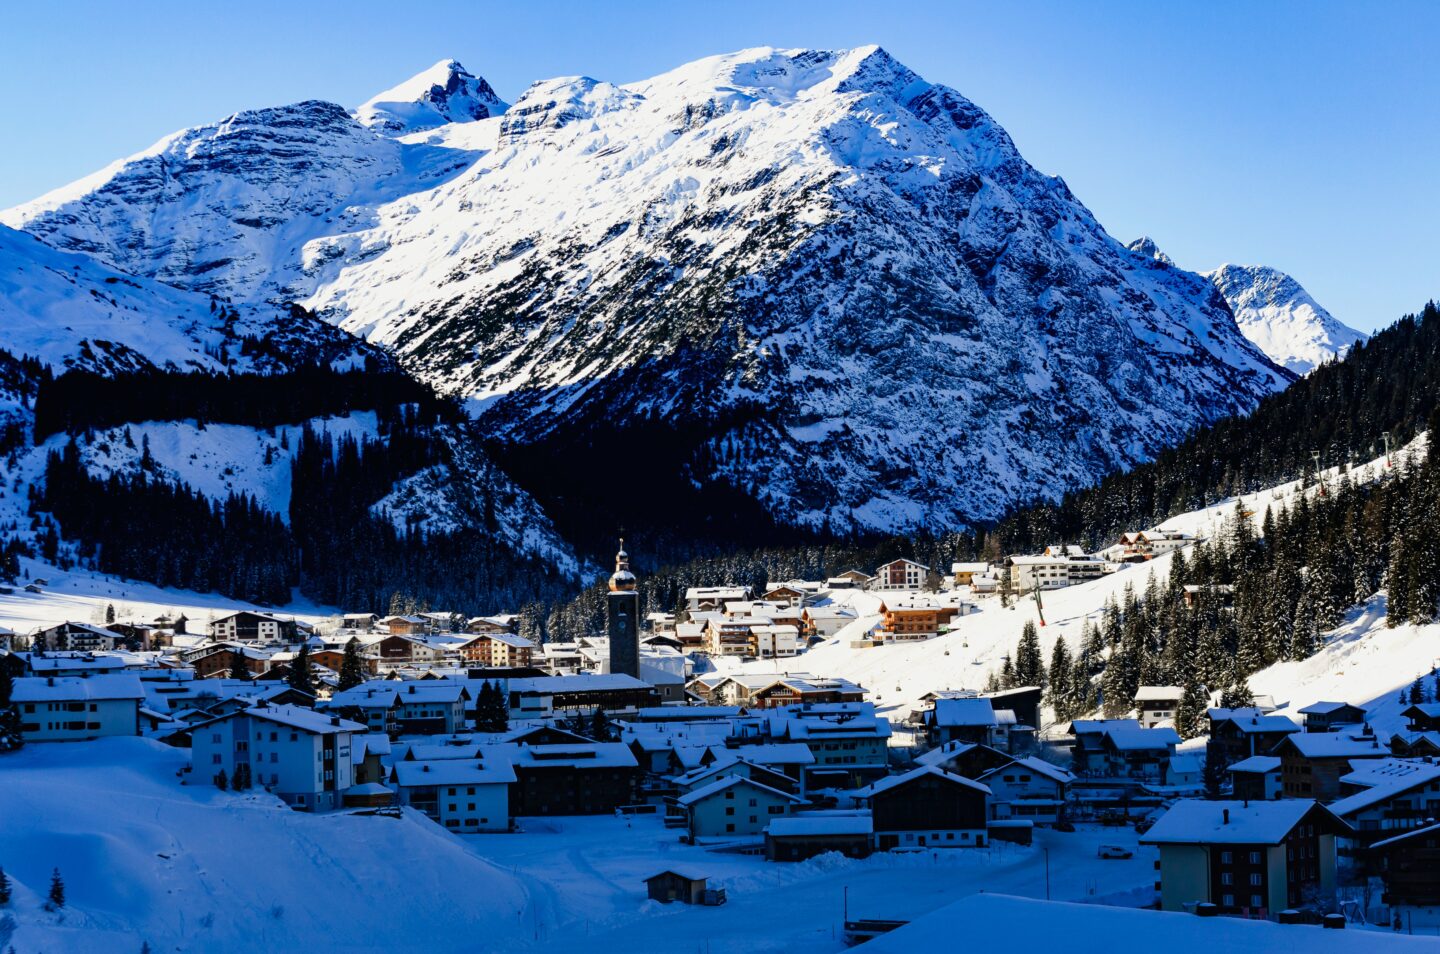 snow covered ski village in valley between snow covered mountains with blue sky in background